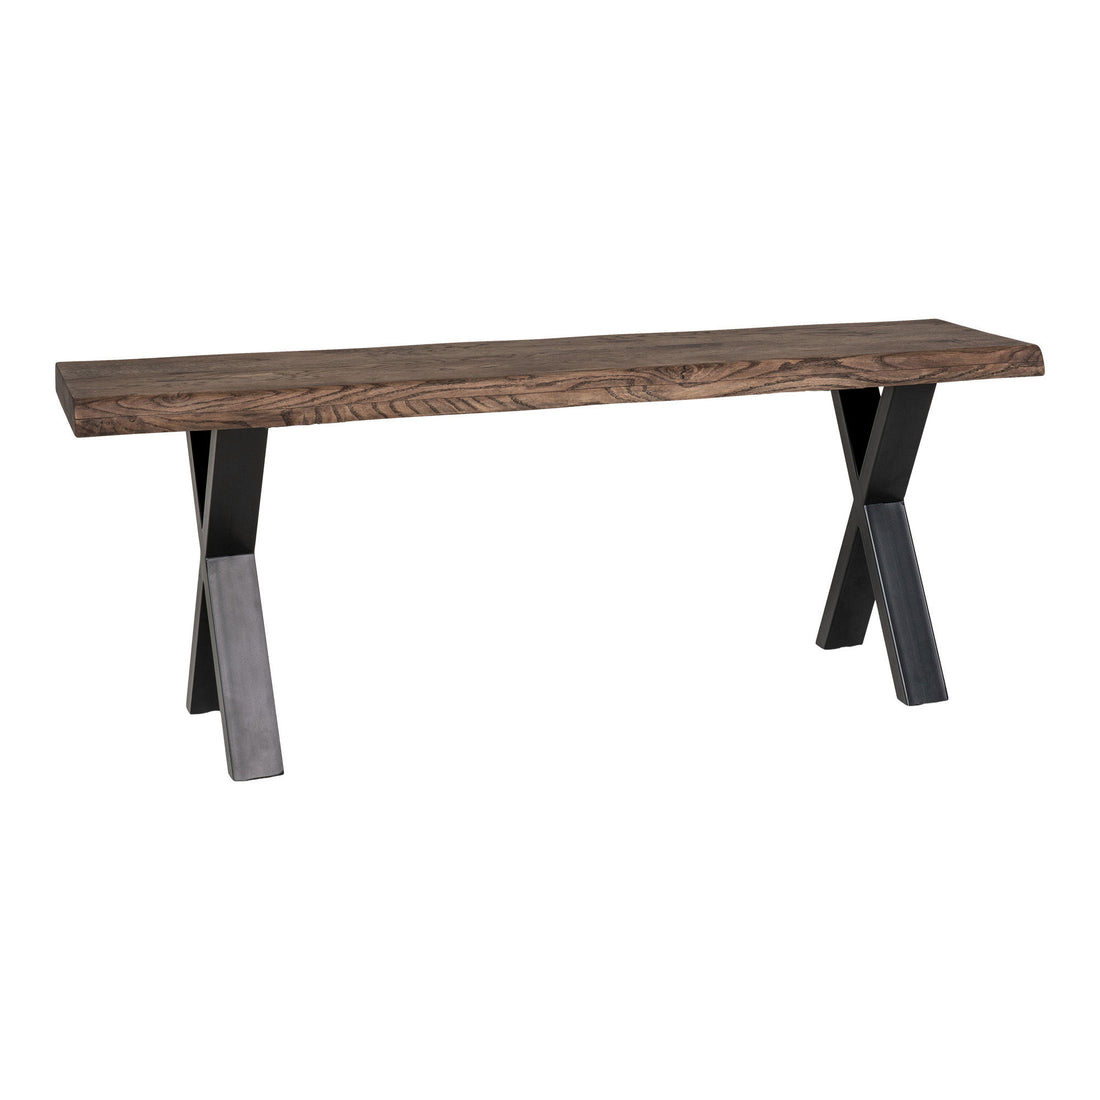 Toulon bench - bench in smoked oiled oak with wavy edge 120x32 cm - 1 - pcs